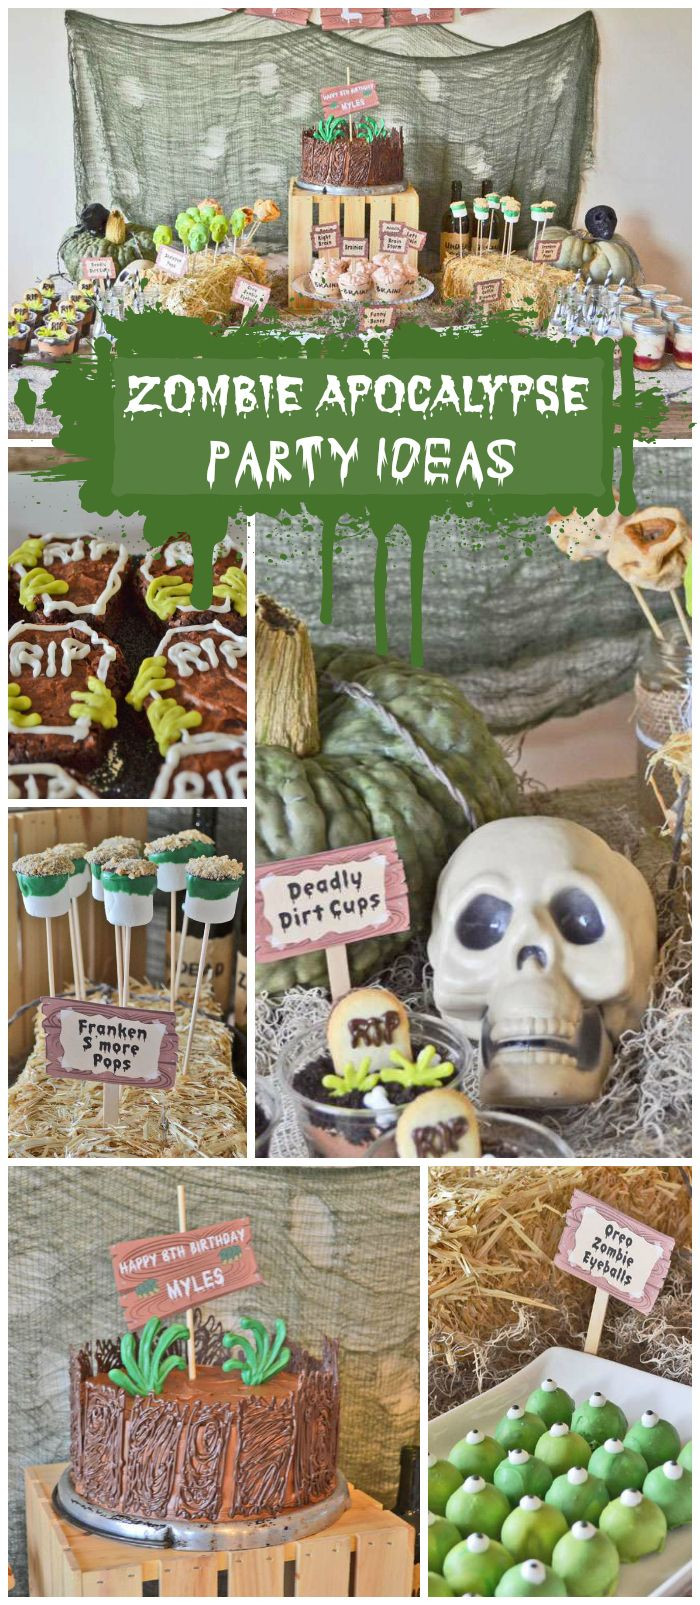 Zombie Birthday Decorations
 Pin on Halloween Party Ideas